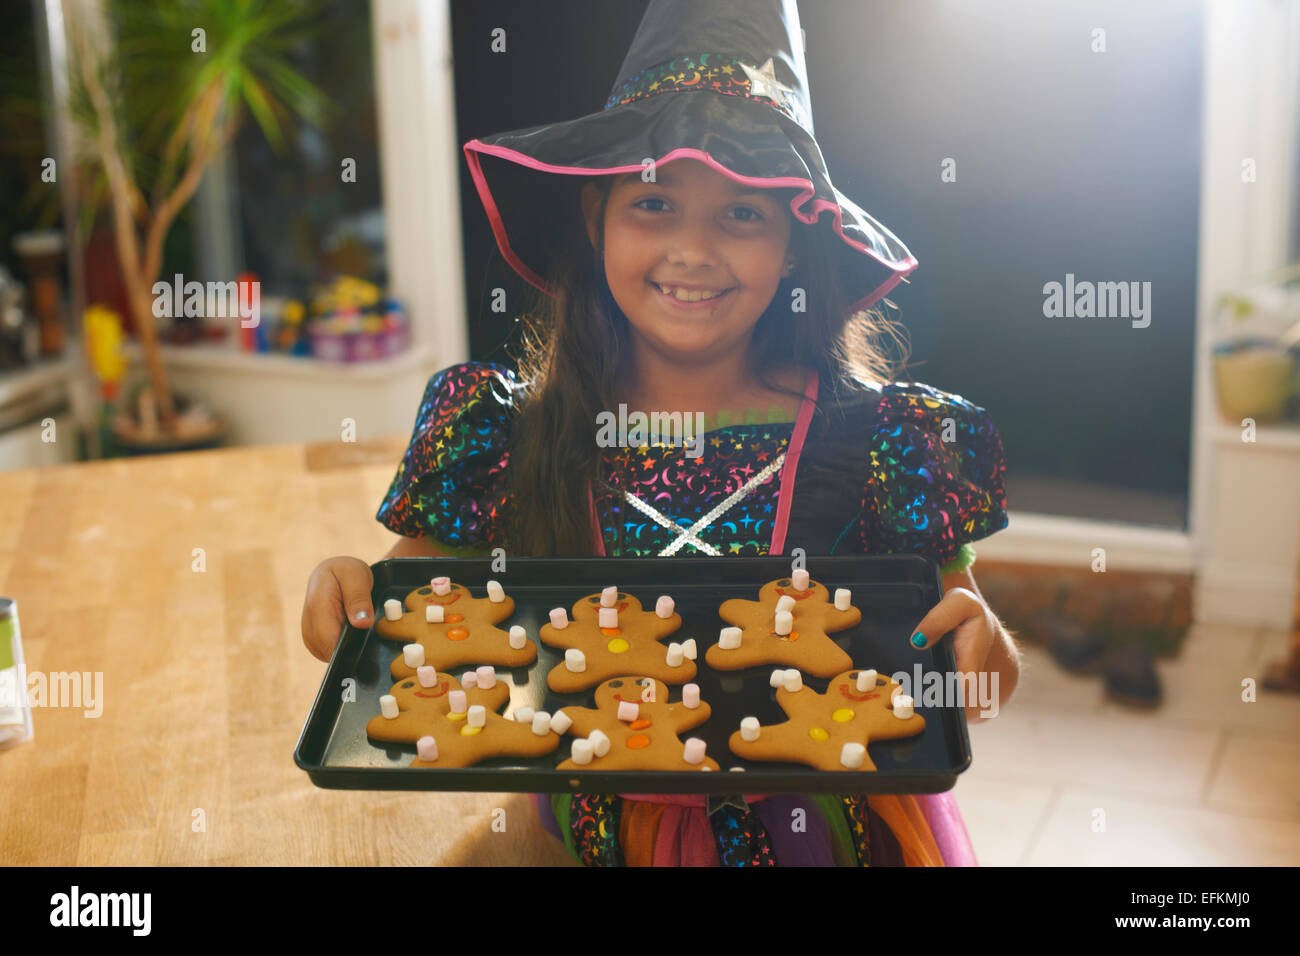 Costume halloween girl holding tray of gingerbread men Banque D'Images